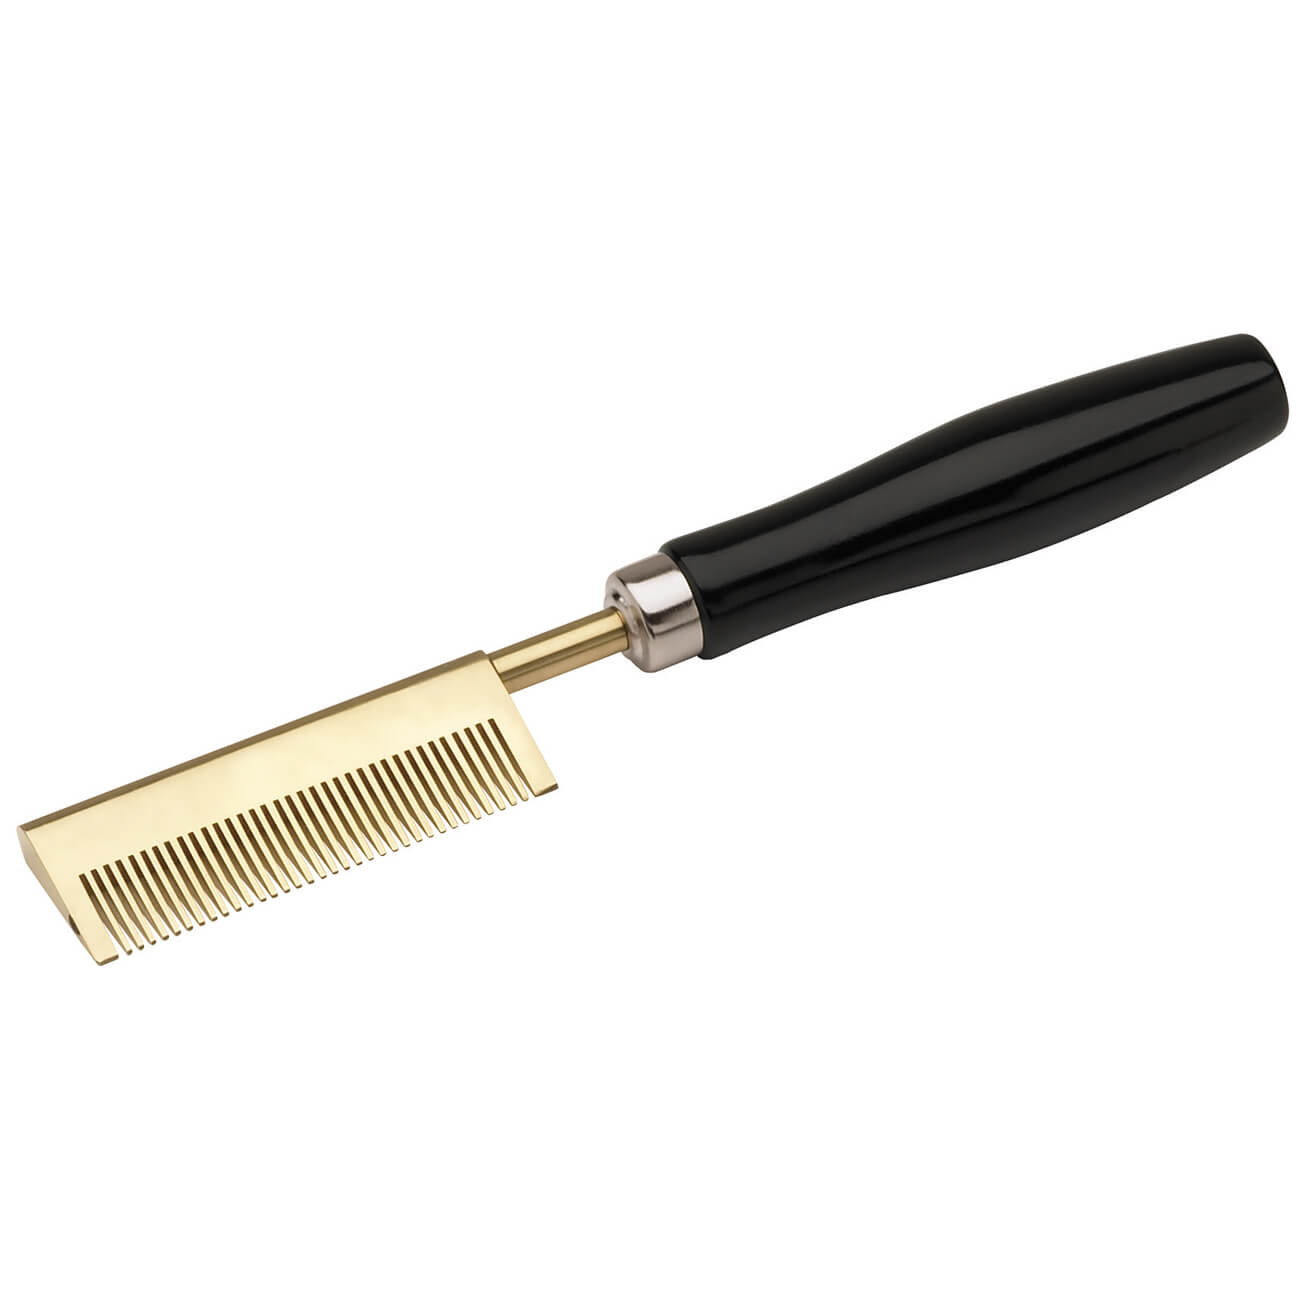 Gold ‘N Hot Professional Stove Iron Pressing Comb